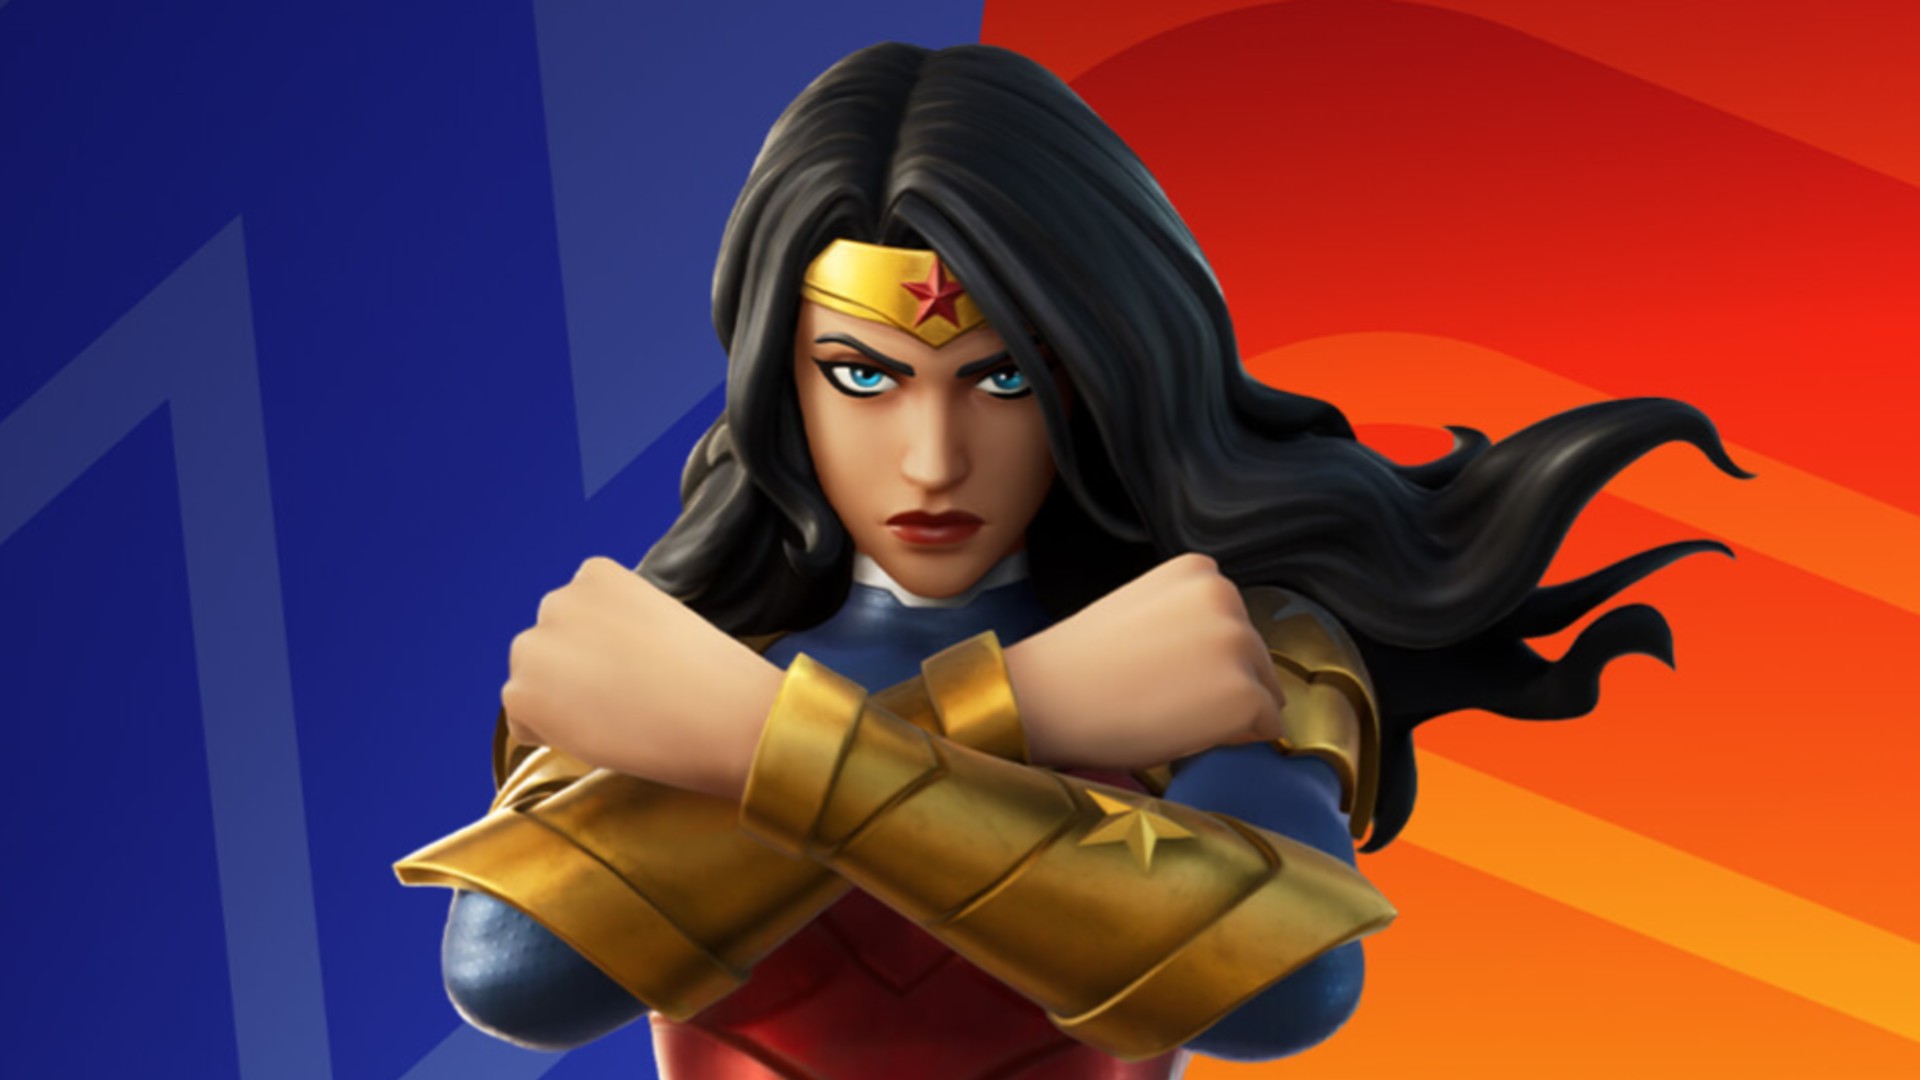  Wonder Woman is coming to Fortnite 